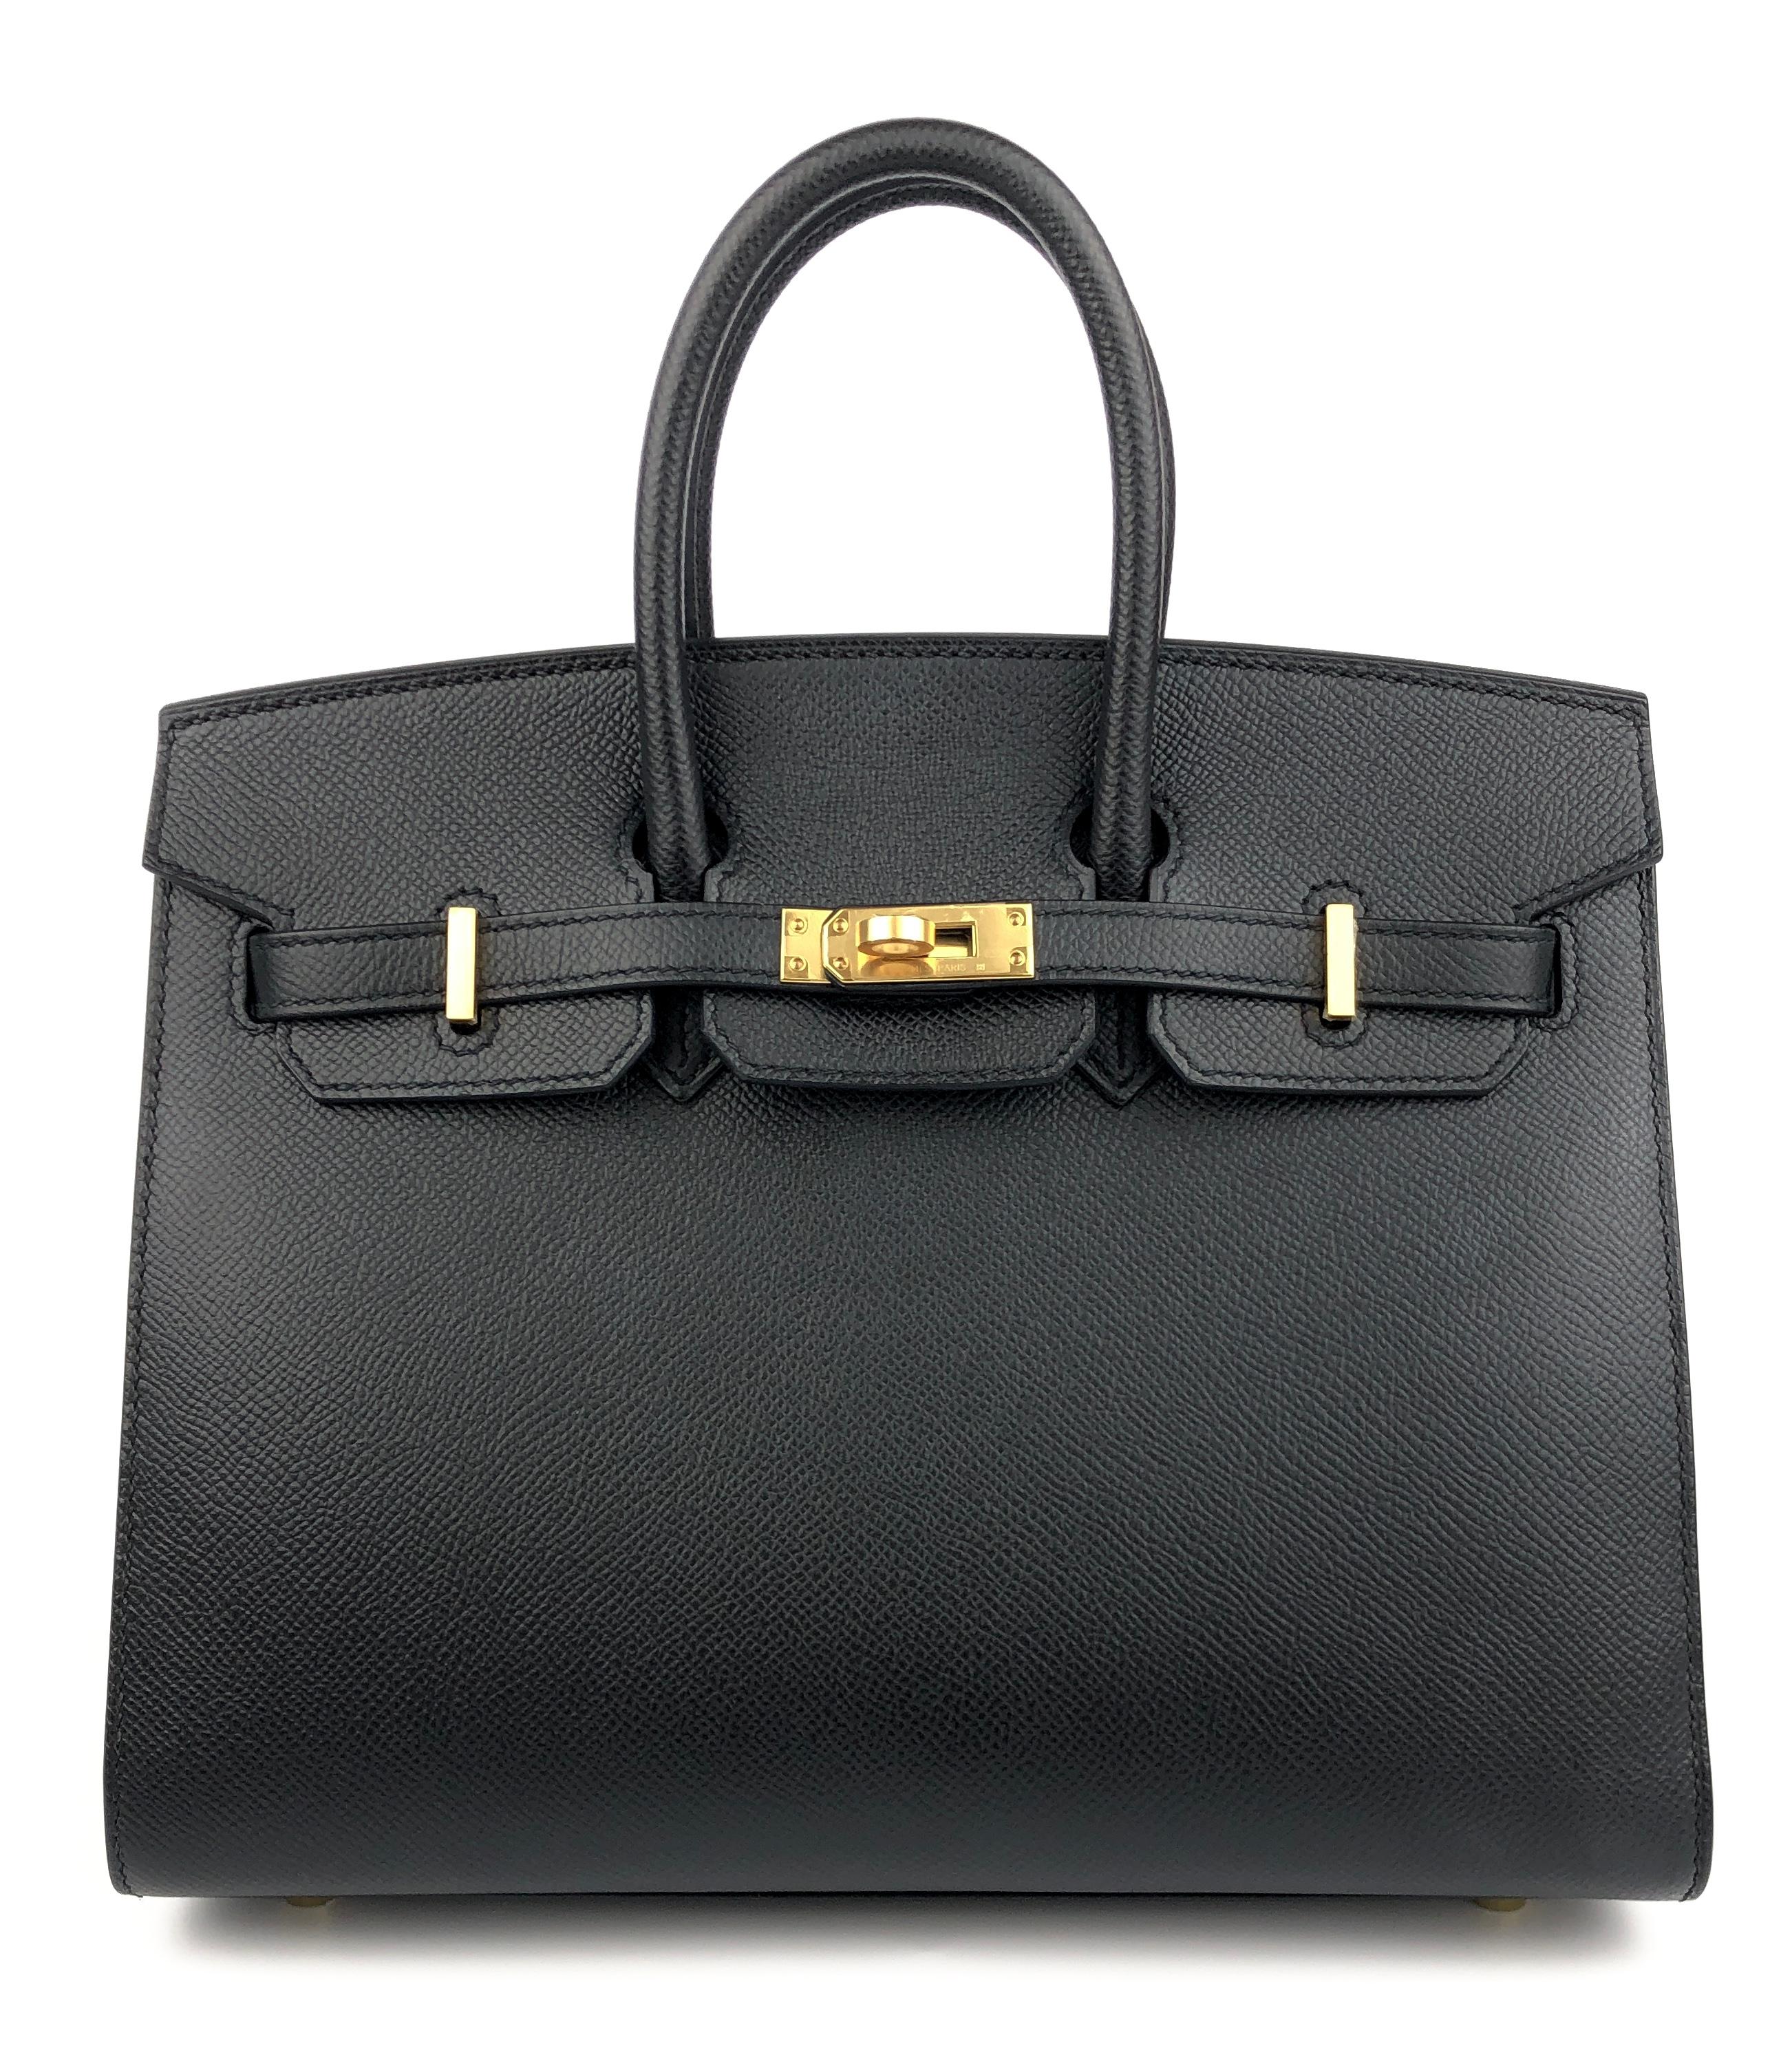 Classic Absolutely Stunning New Rare Stunning Hermès Birkin 25 Sellier Black Epsom Leather Complimented by Gold Hardware. Y Stamp 2020. 
One of the most coveted hardest combinations to get! Includes all accessories and Box. 

Shop with Confidence